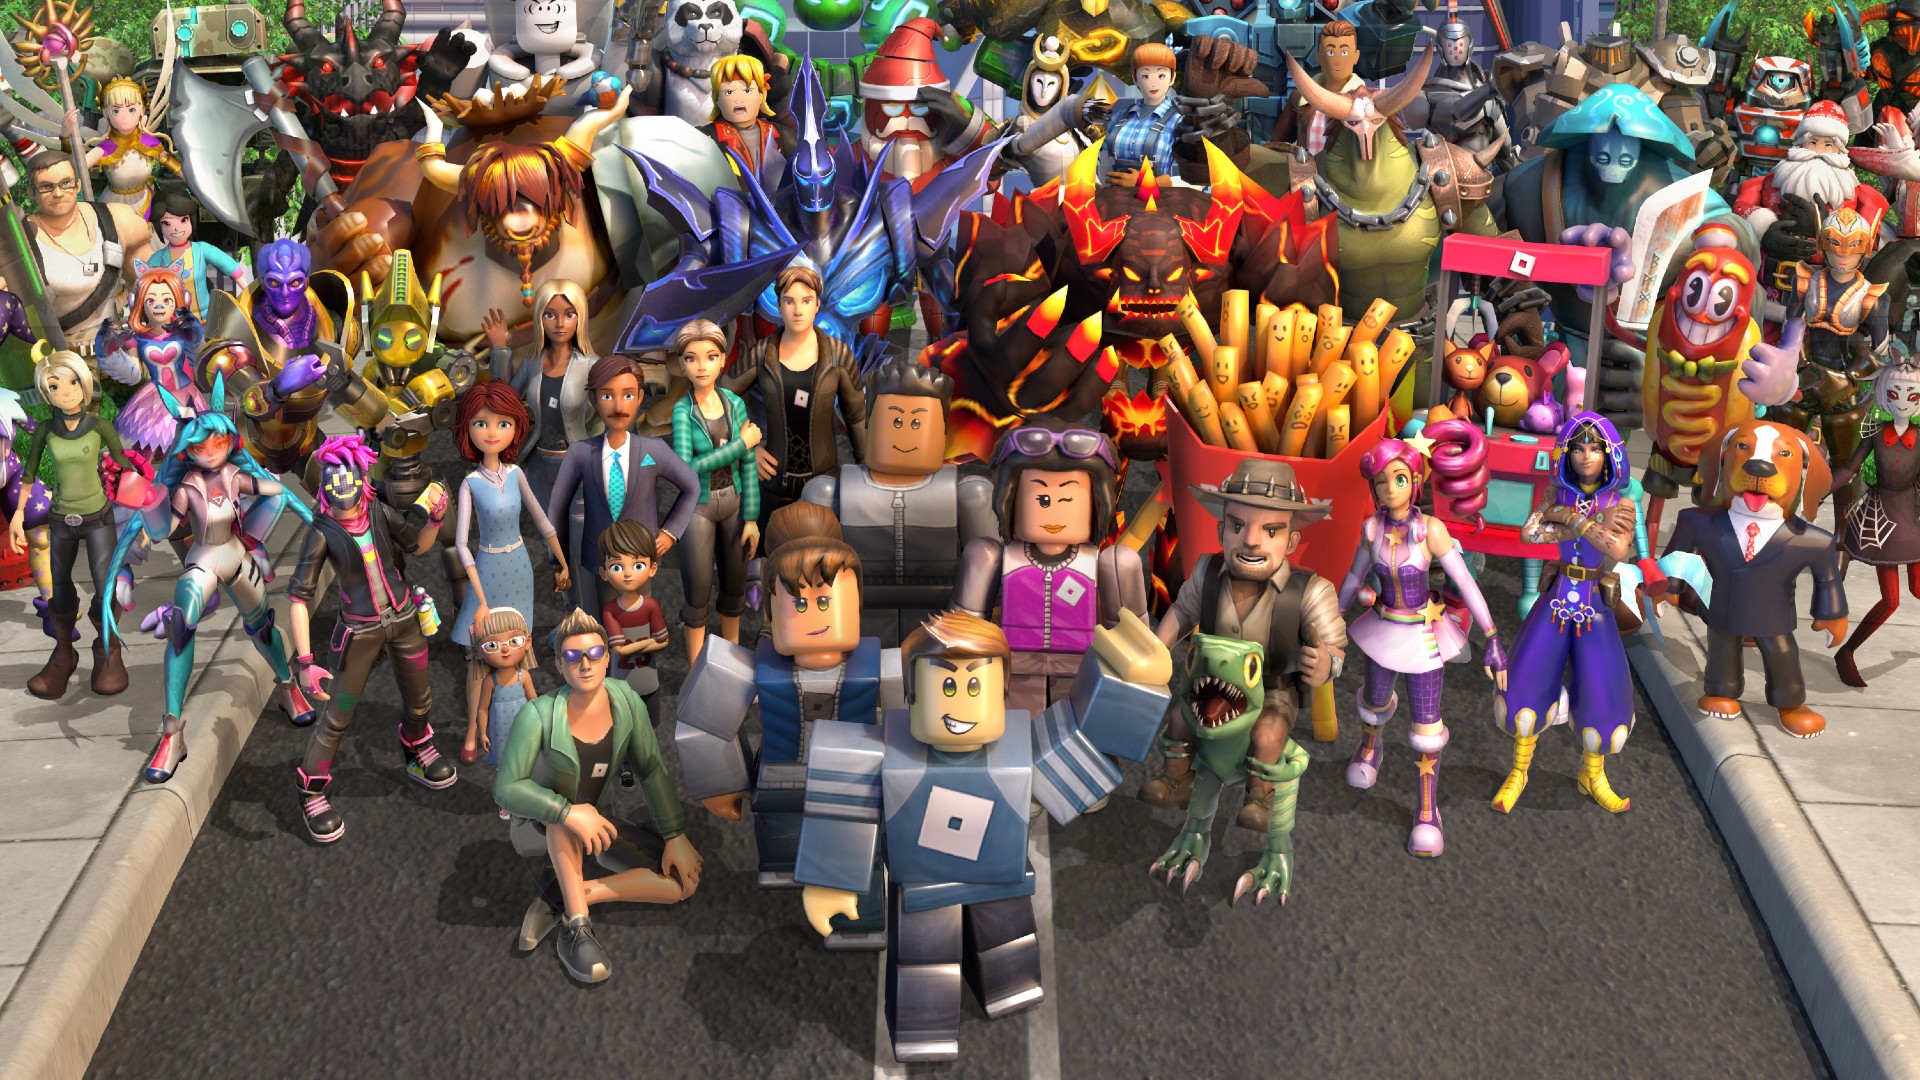 Roblox promo codes list June 2022 – how to redeem